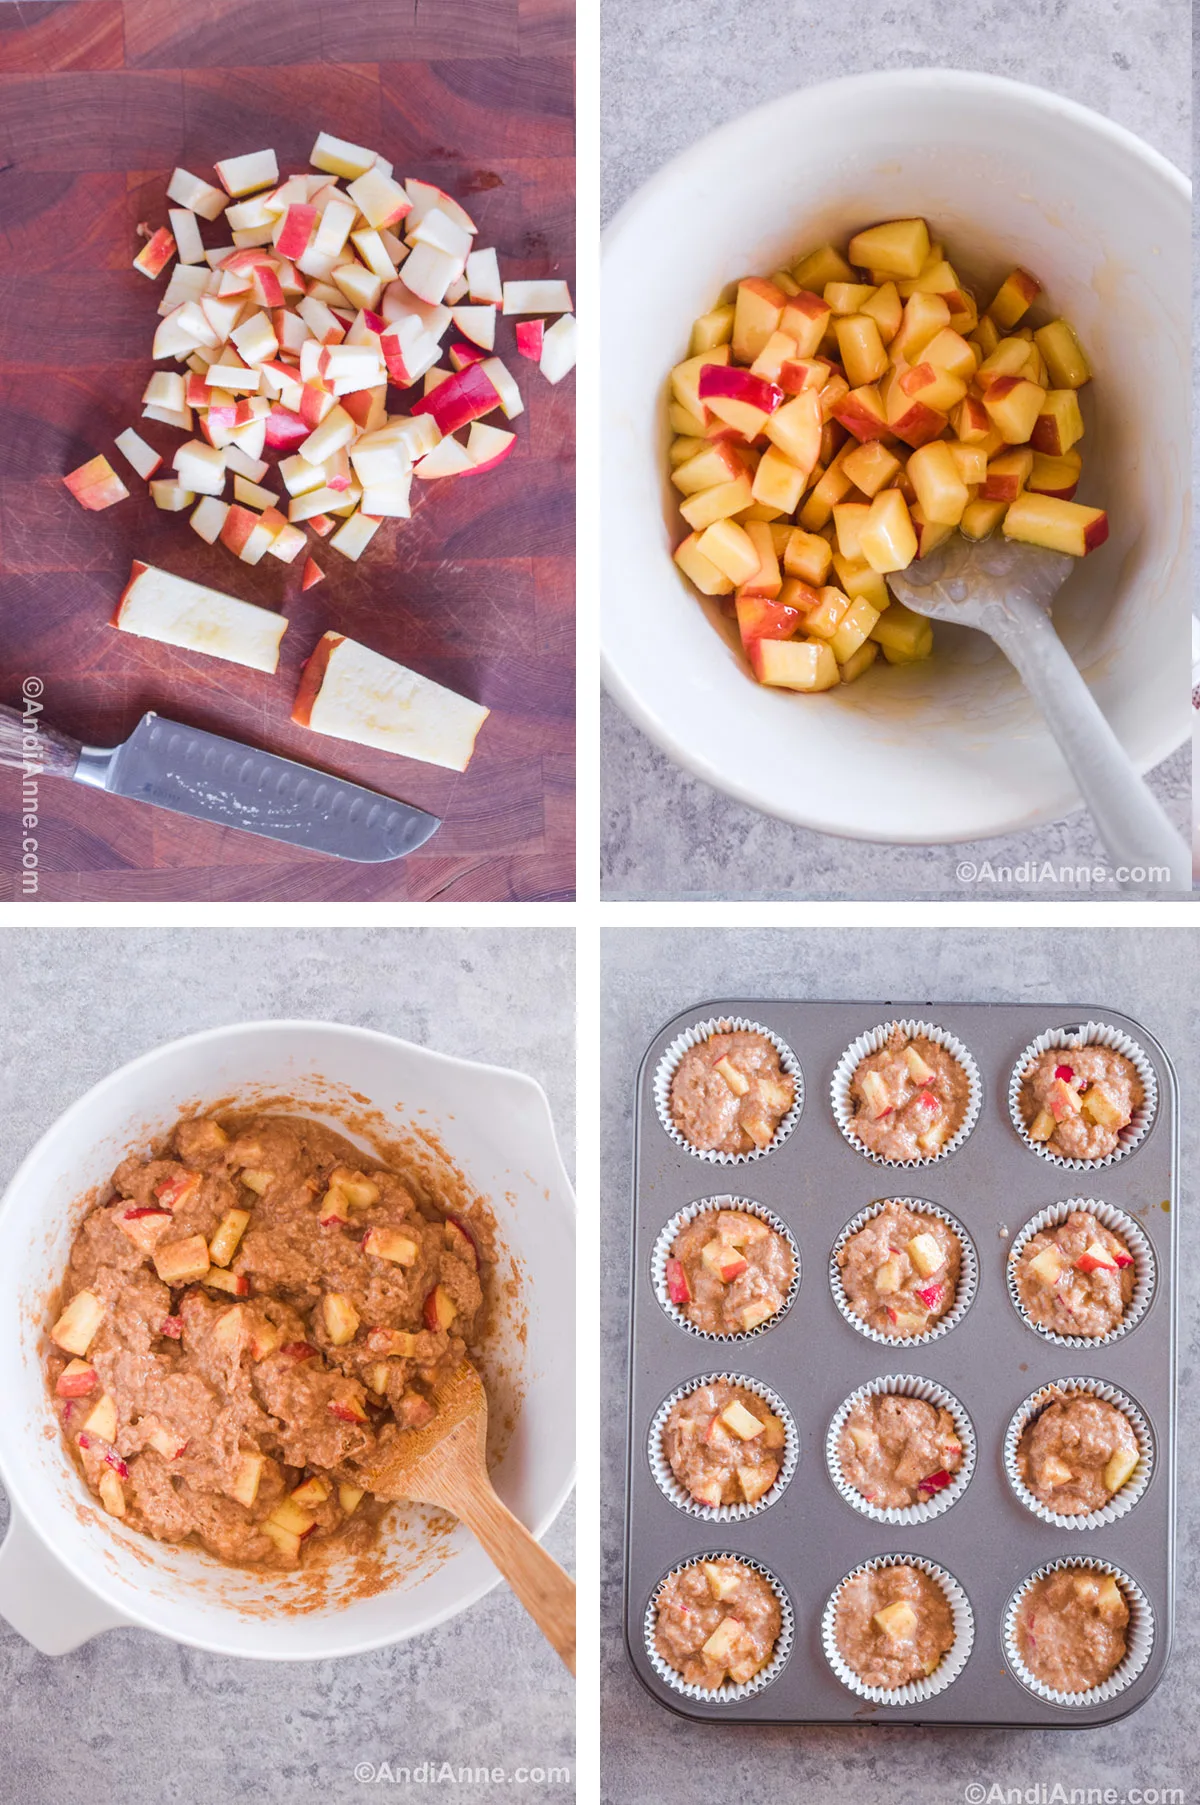 Four images showing steps to make recipe including chopped apples with a knife. A bowl of chopped apples mixed in honey with a spatula. Muffin batter with chopped apples in a bowl with a wood spoon. A muffin pan with paper liners and batter in each cup.